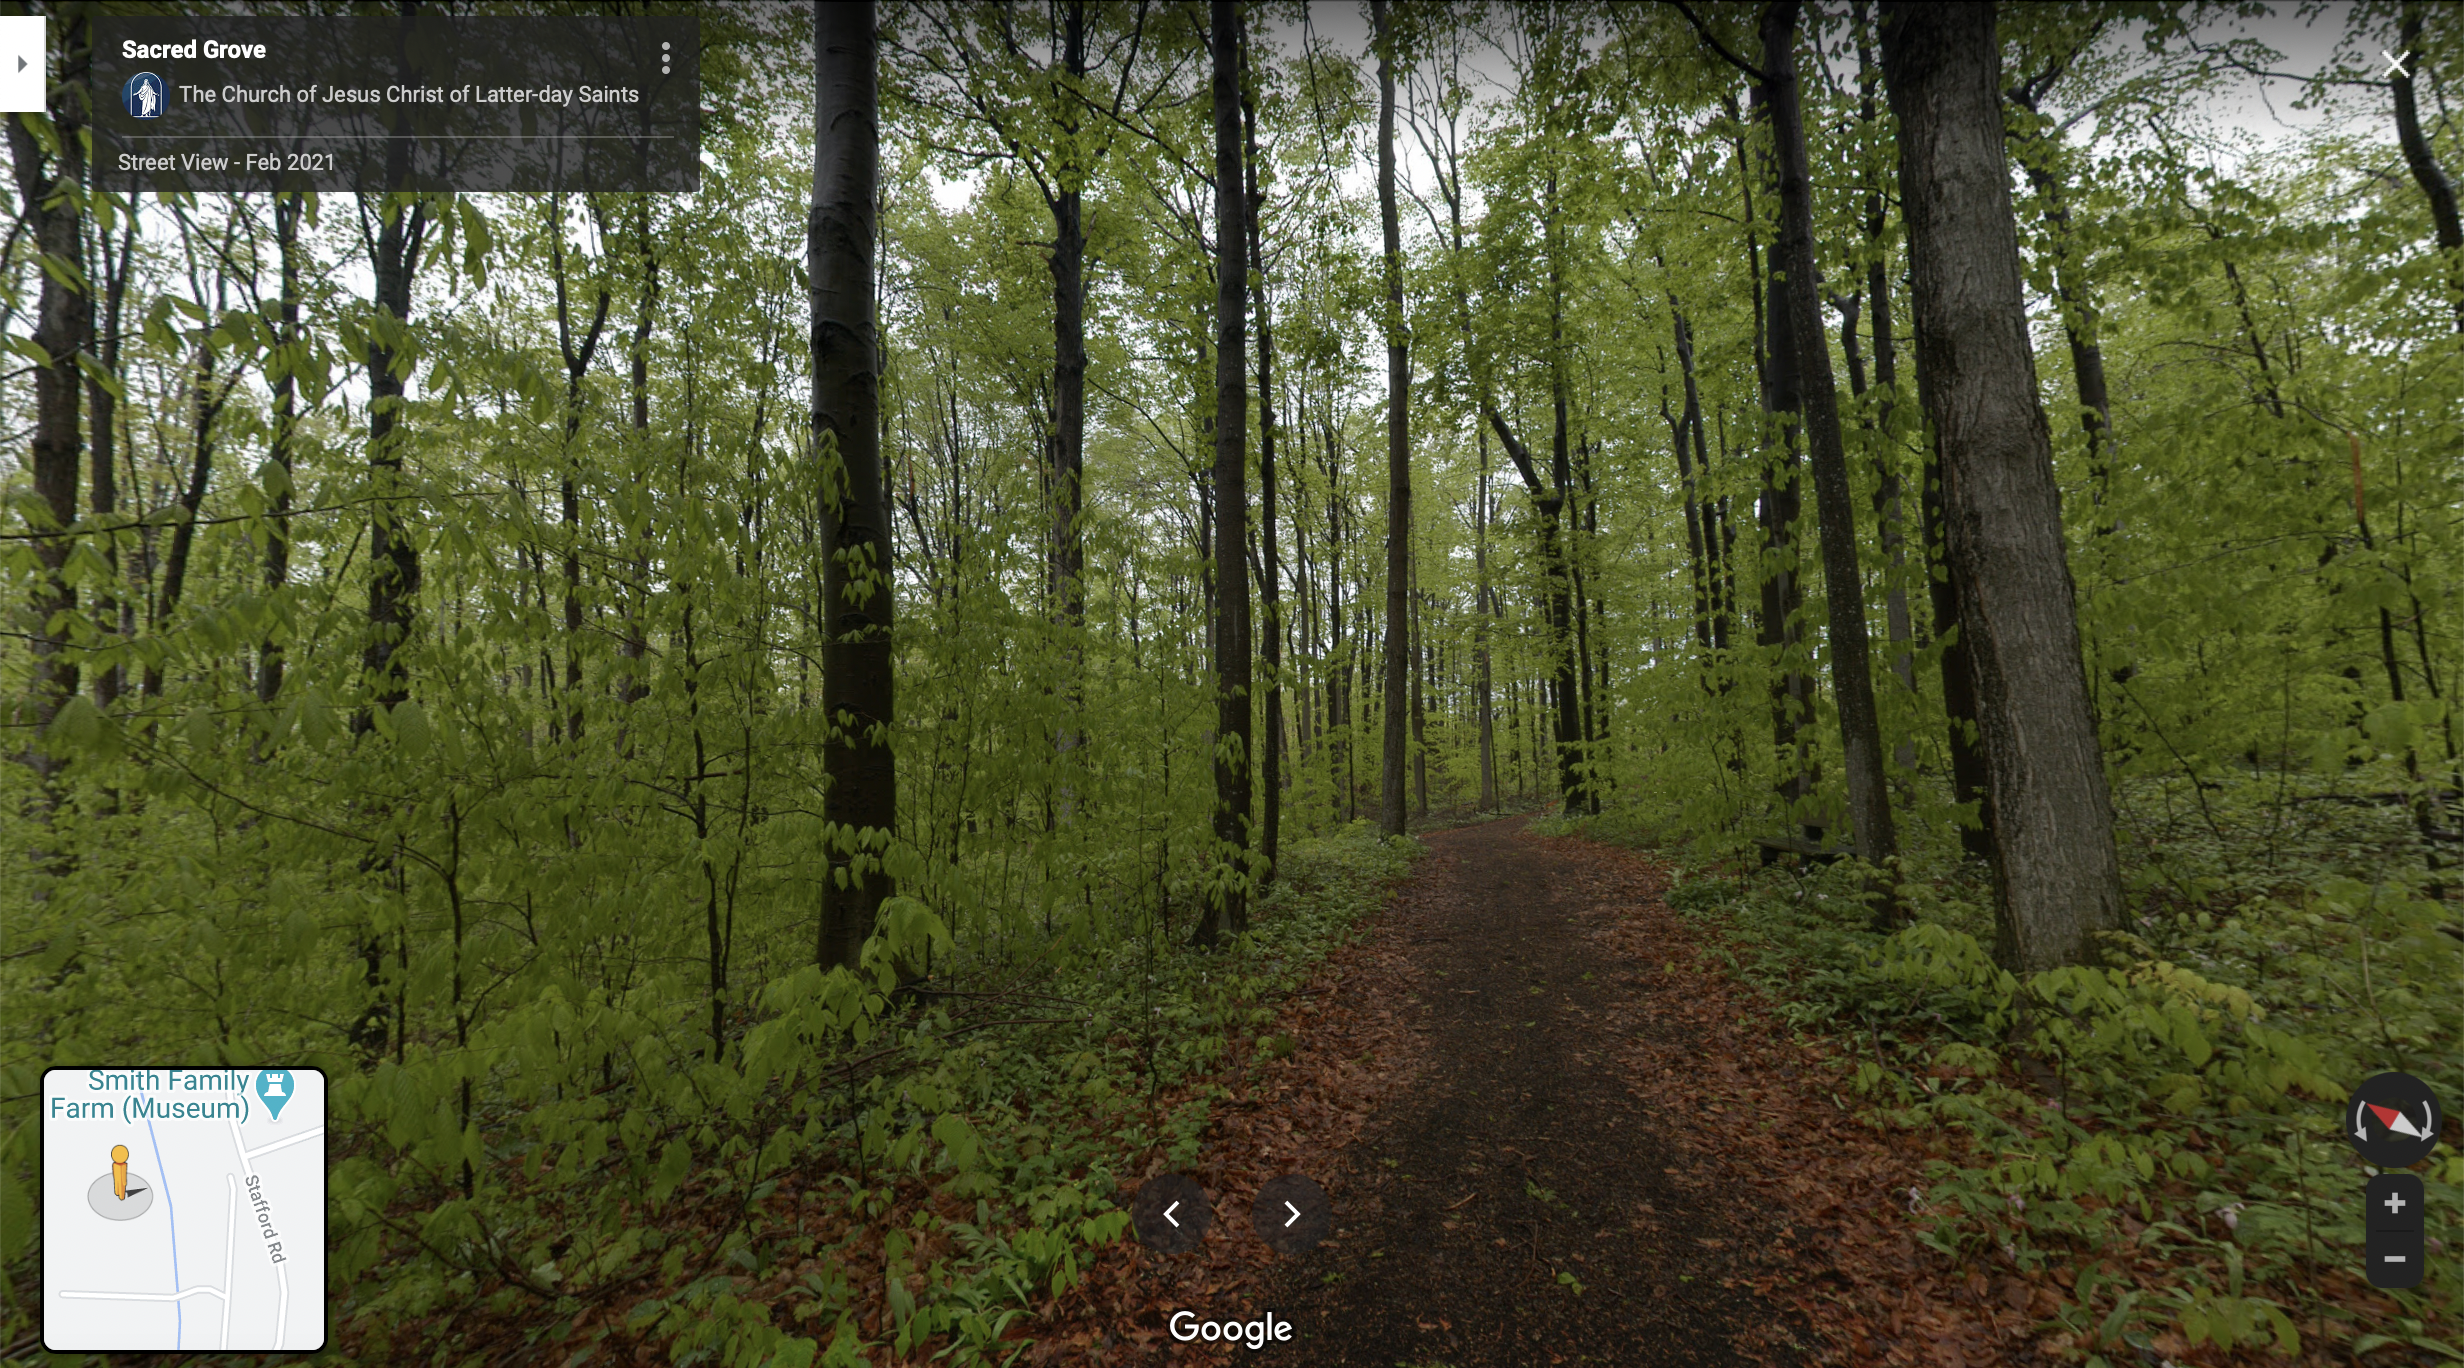 Screenshot of the Google Maps 360 view of the Sacred Grove